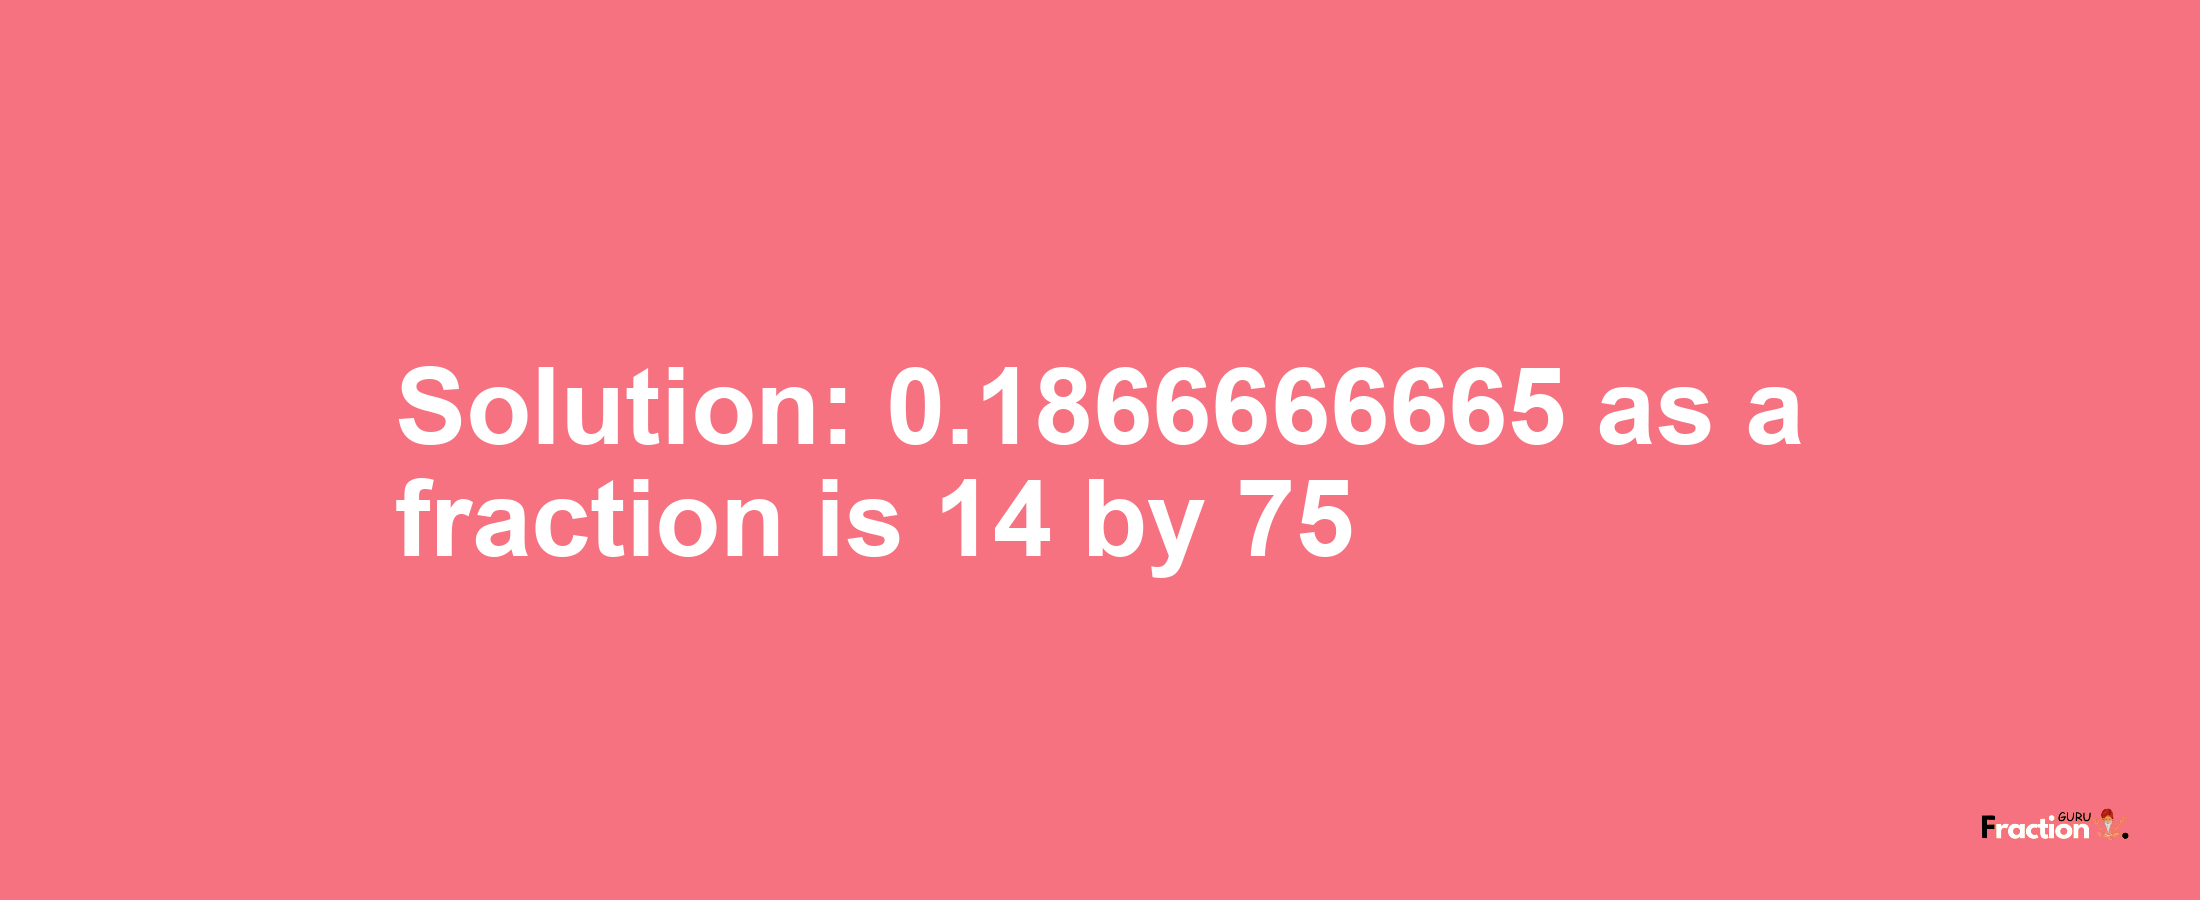 Solution:0.1866666665 as a fraction is 14/75